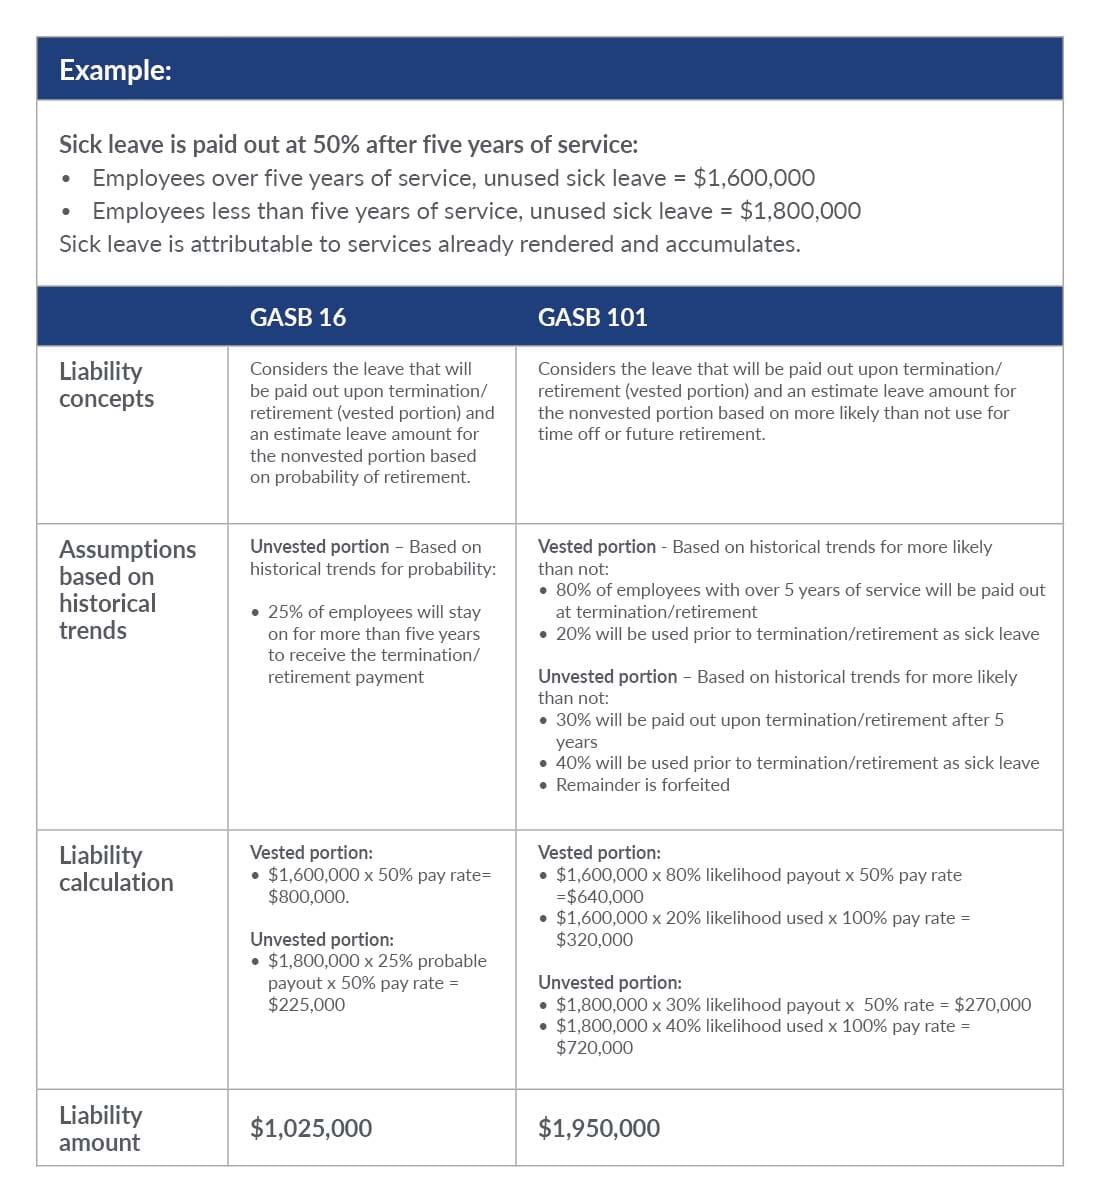 Table showing differences in liability concepts, calculation, and amount between GASB 16 and GASB 101.